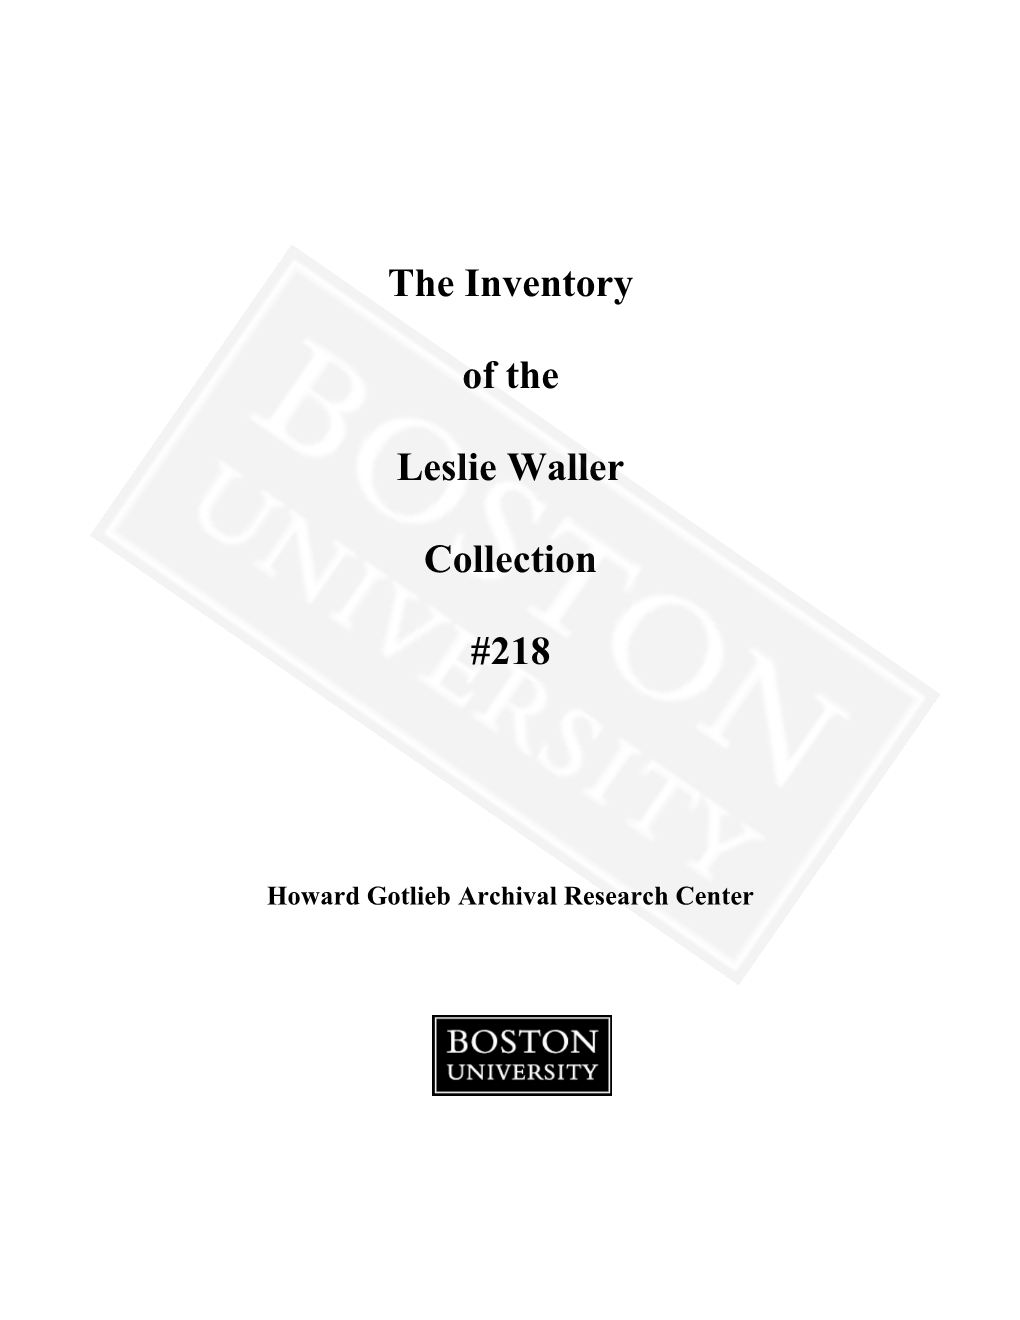 The Inventory of the Leslie Waller Collection #218